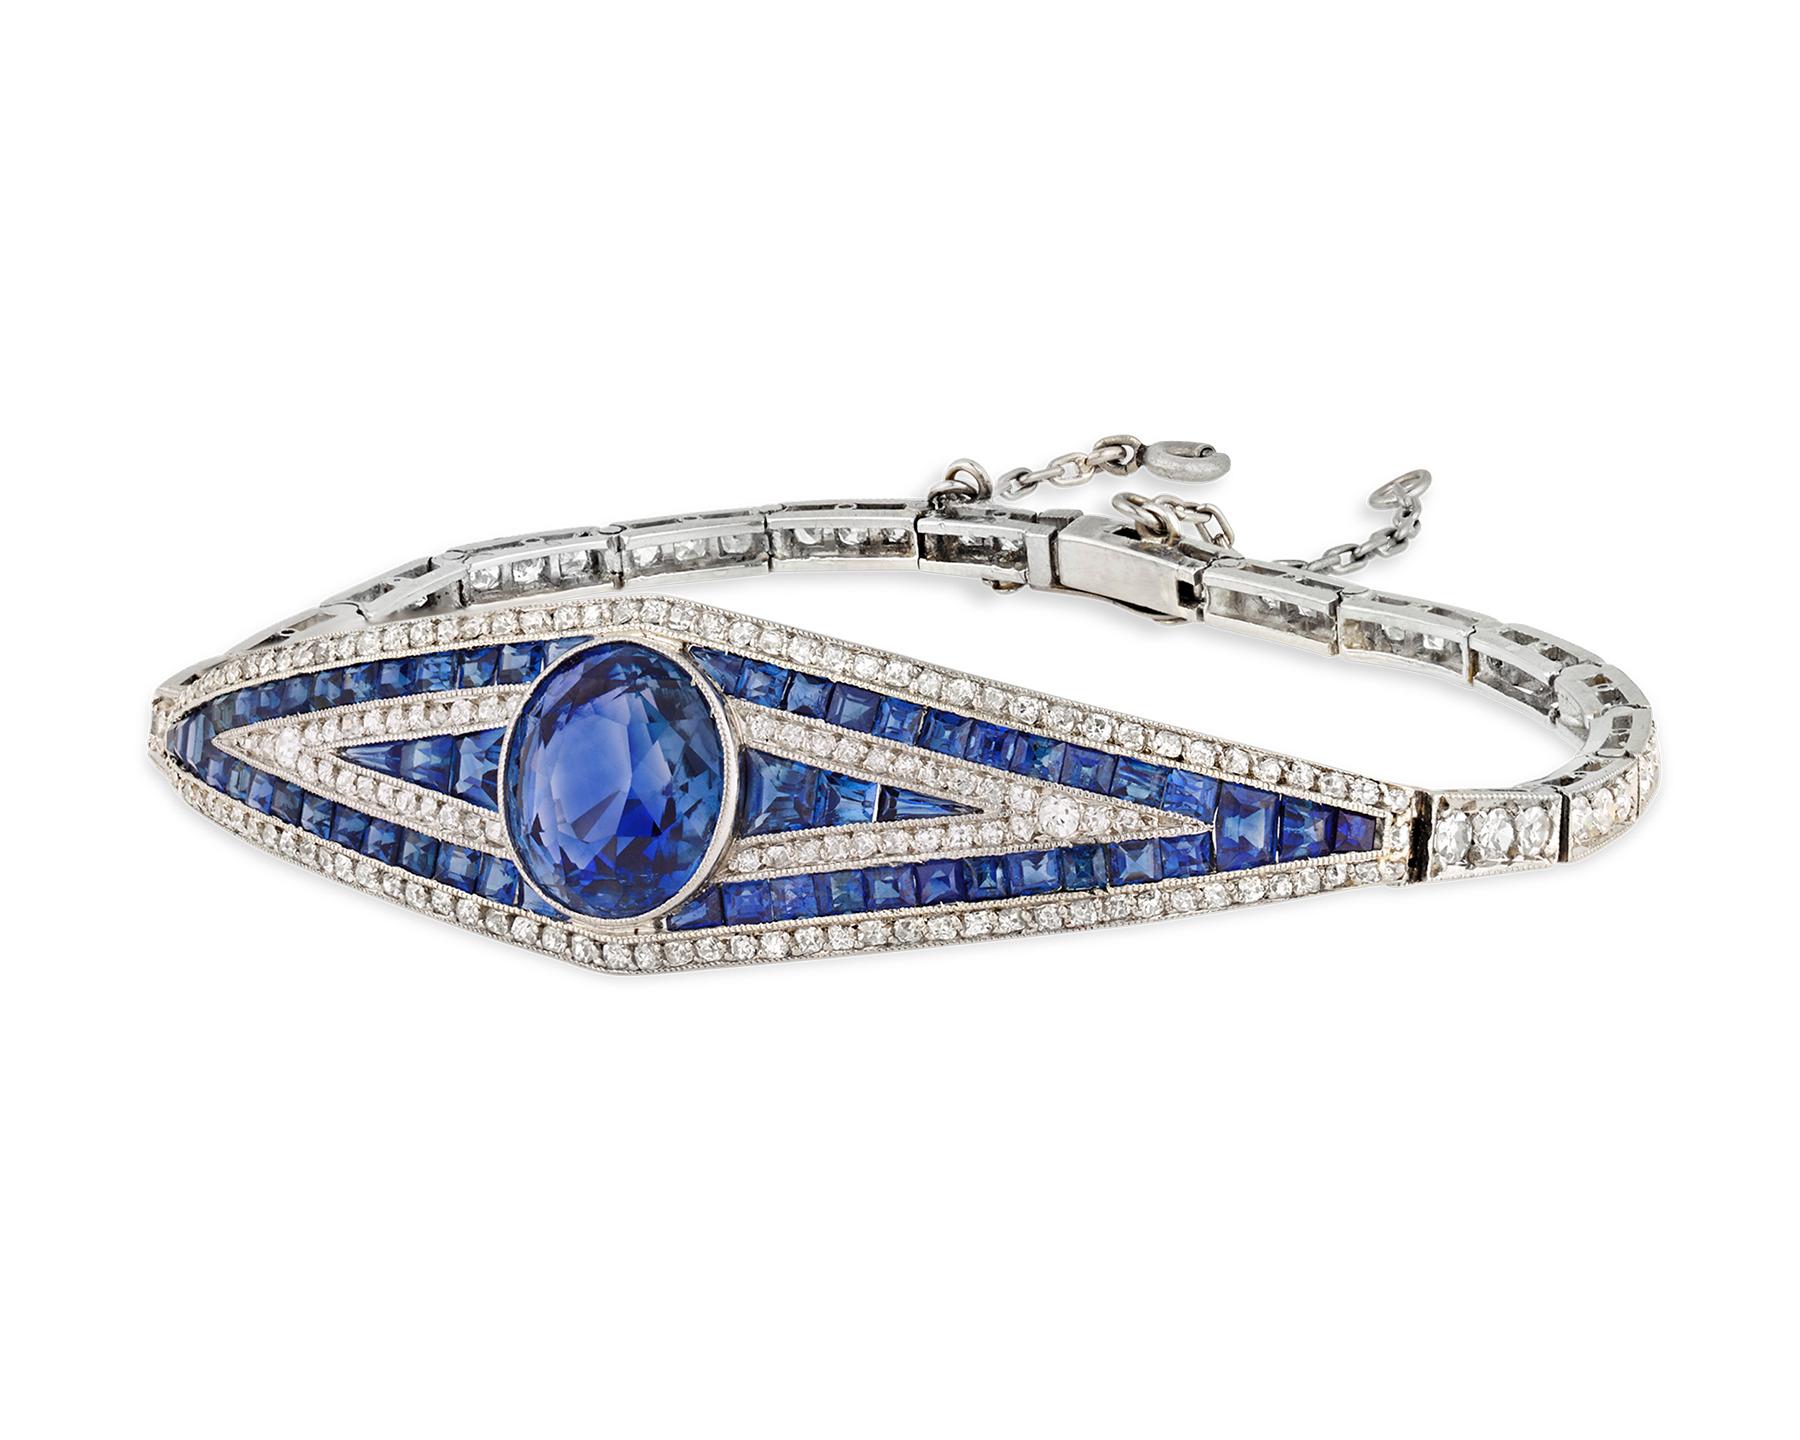 The chic sophistication and glamour of the Art Deco period comes alive in this breathtaking sapphire and diamond bracelet. An impressive 4.00 combined carats of royal blue Ceylon sapphires spun amid dozens of sparkling white diamonds. Crafted of